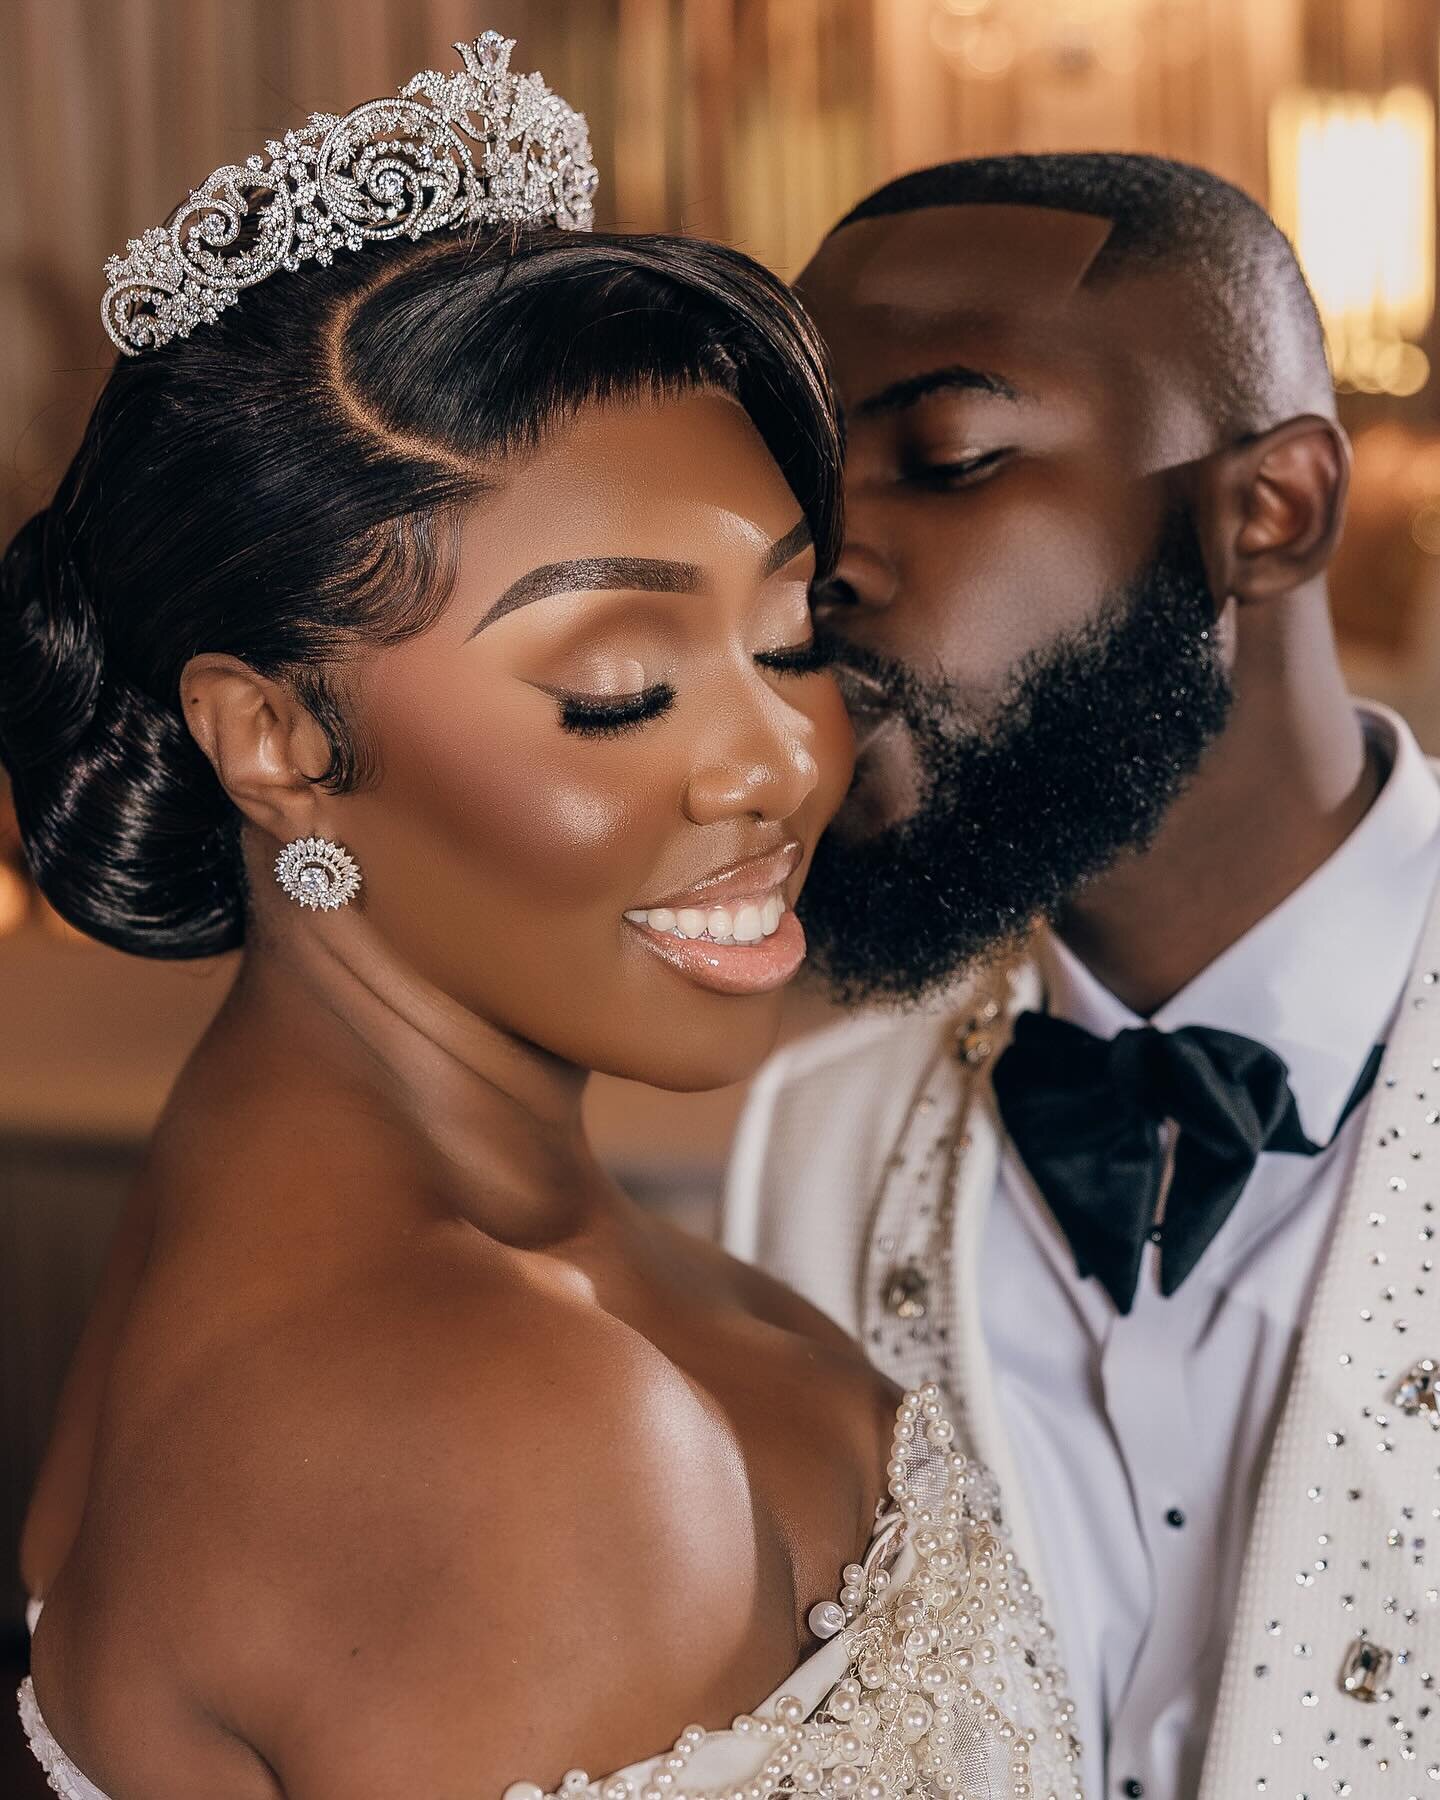 &ldquo;Found my forever in a world of fleeting moments. Here&rsquo;s to forevermore&rdquo; 🤎🤎 🇬🇭+🇳🇬
Mr &amp; Mrs Adarkwah

Bride: @ezzyyyyy_ 
Groom: @mikegh4real 
Photographer: @saul.production 
Videographer: @mikeokaforfilms 
Planner: @oncue.e